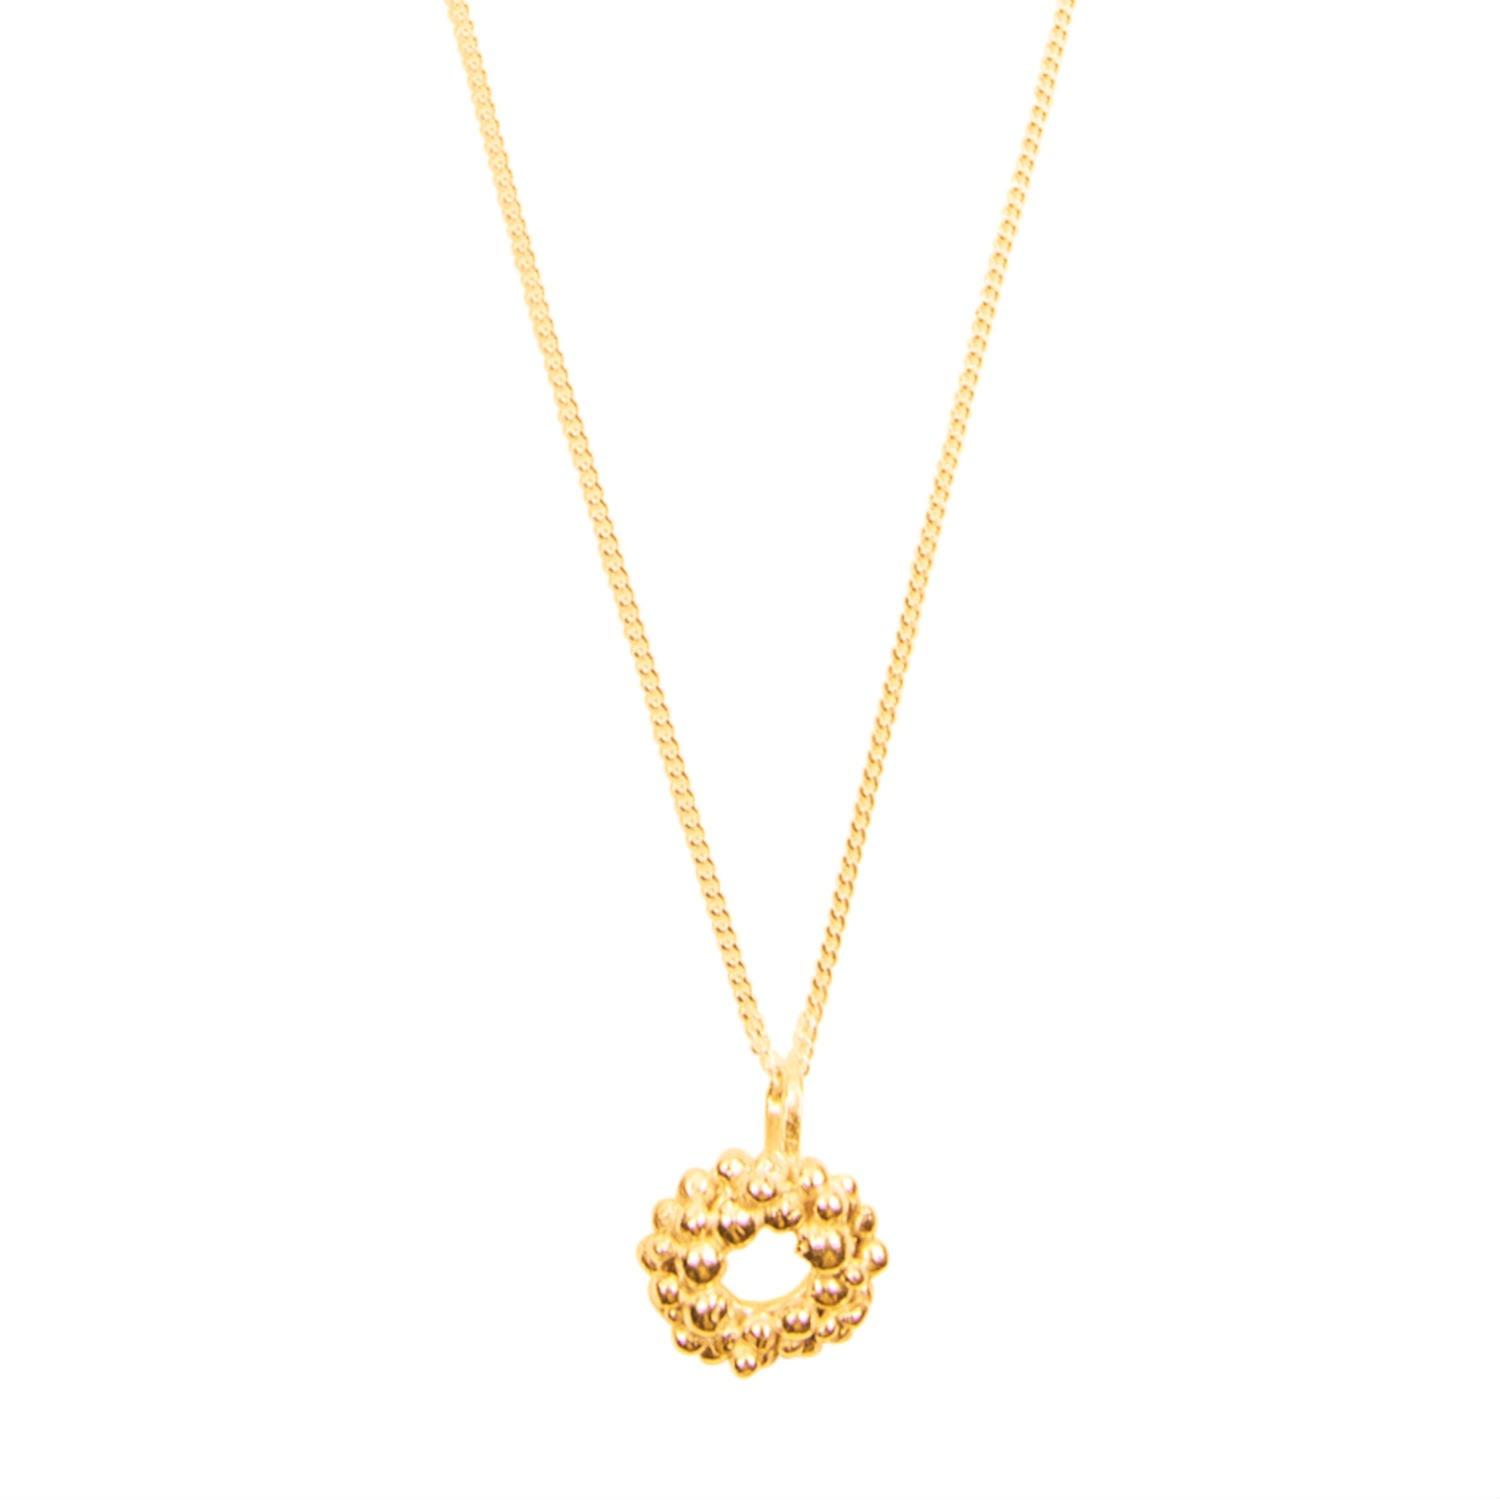 Lily Flo Jewellery Rock Chic Circle Necklace In Solid Gold in Metallic ...